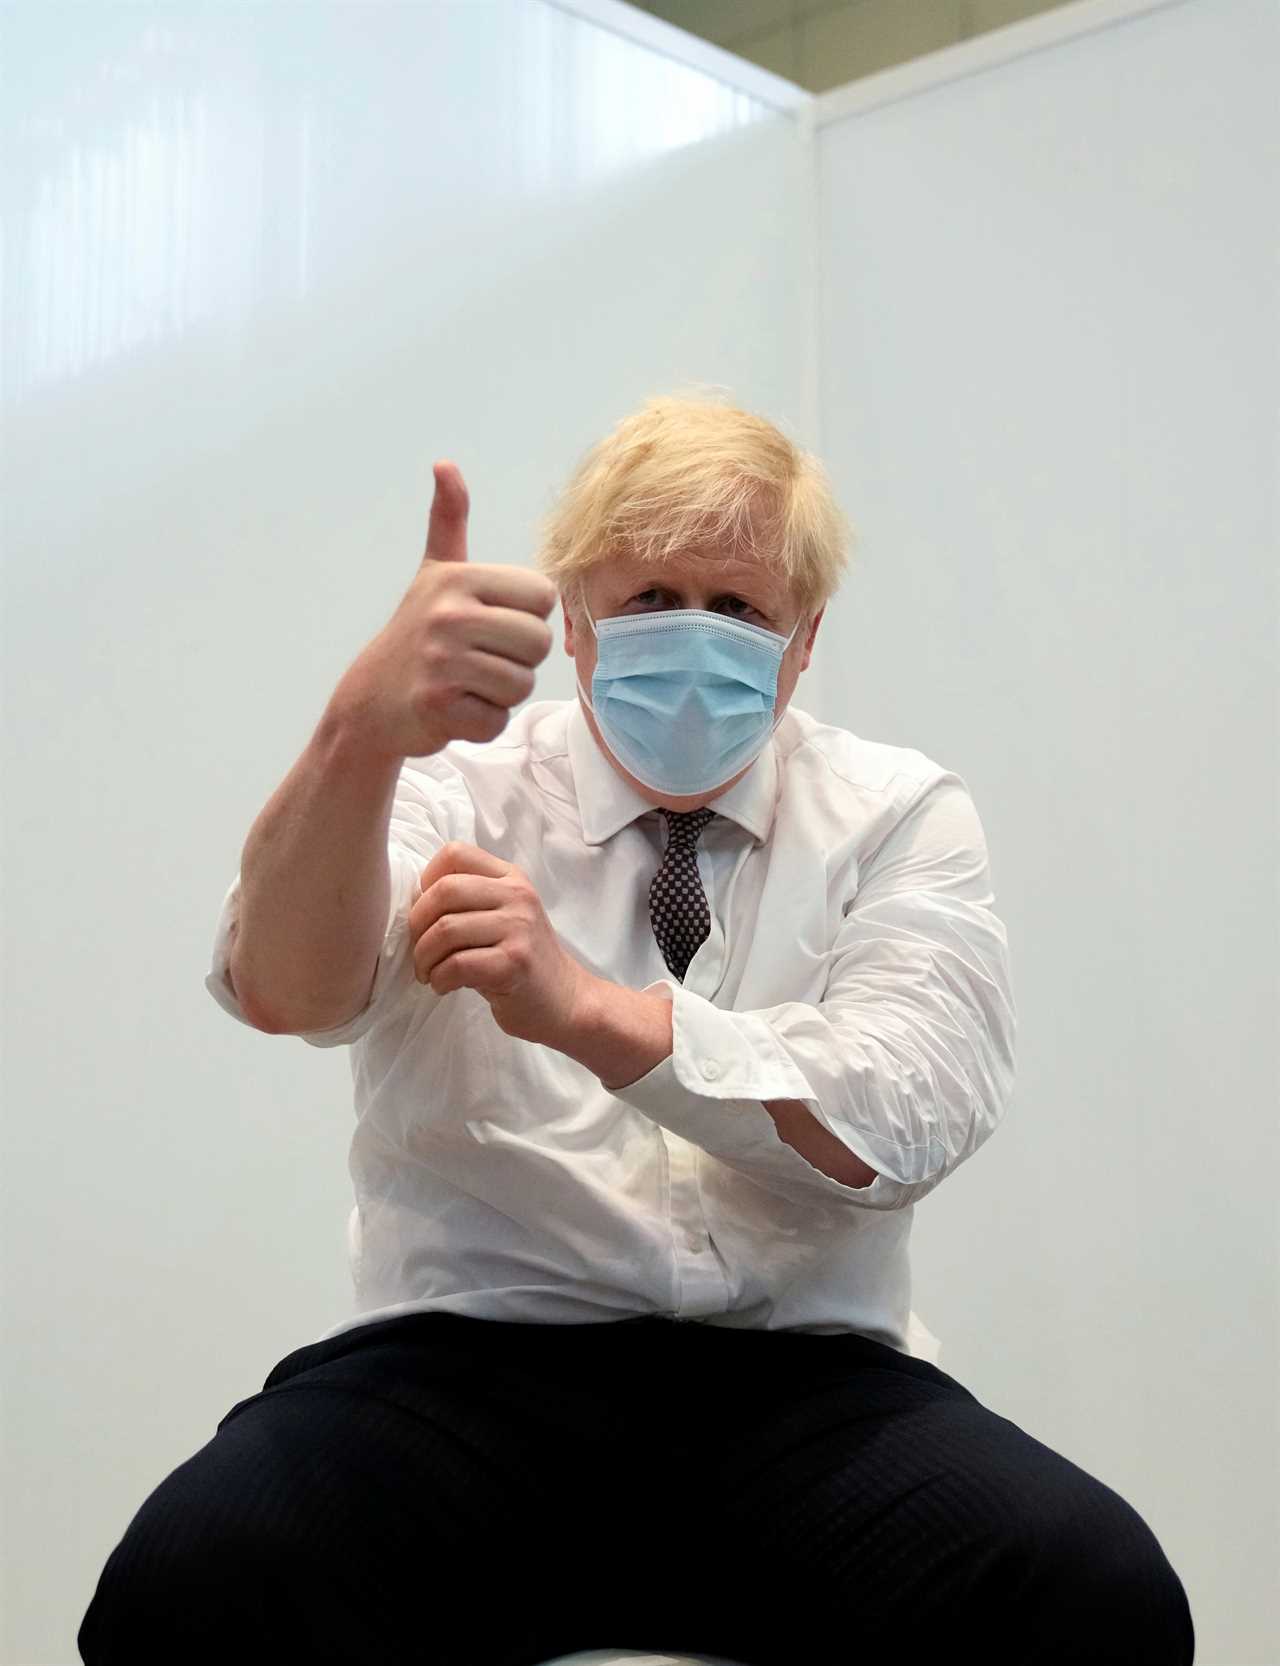 Boris Johnson hopes to enlist Joe Biden to help vaccinate entire world against Covid by end of next year